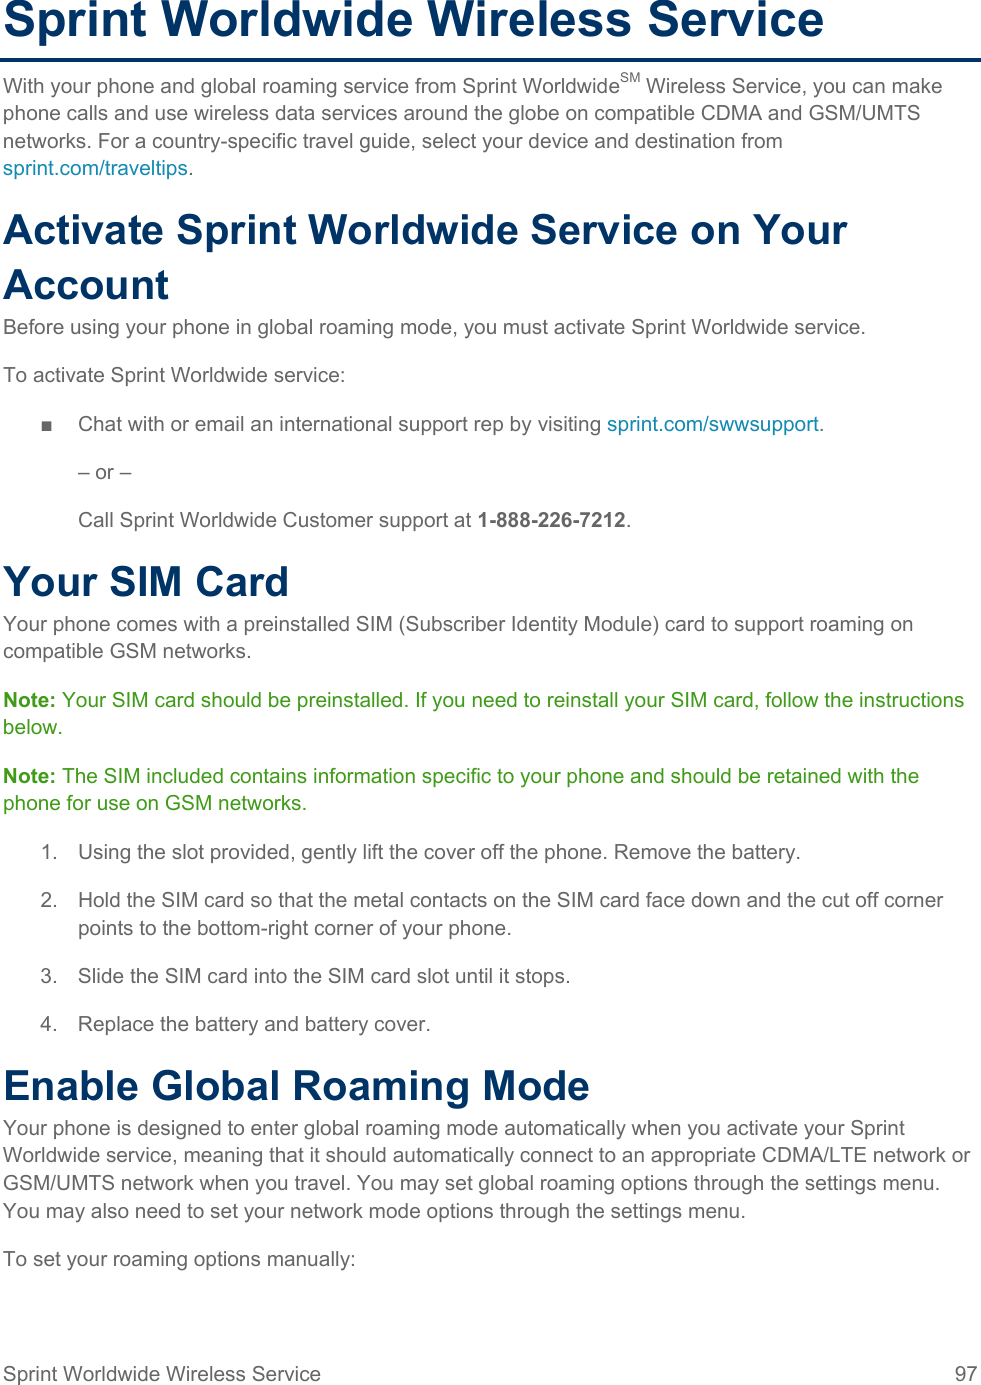  Sprint Worldwide Wireless Service With your phone and global roaming service from Sprint WorldwideSM Wireless Service, you can make phone calls and use wireless data services around the globe on compatible CDMA and GSM/UMTS networks. For a country-specific travel guide, select your device and destination from sprint.com/traveltips. Activate Sprint Worldwide Service on Your Account  Before using your phone in global roaming mode, you must activate Sprint Worldwide service.  To activate Sprint Worldwide service: ■  Chat with or email an international support rep by visiting sprint.com/swwsupport. – or – Call Sprint Worldwide Customer support at 1-888-226-7212.  Your SIM Card Your phone comes with a preinstalled SIM (Subscriber Identity Module) card to support roaming on compatible GSM networks. Note: Your SIM card should be preinstalled. If you need to reinstall your SIM card, follow the instructions below.  Note: The SIM included contains information specific to your phone and should be retained with the phone for use on GSM networks. 1. Using the slot provided, gently lift the cover off the phone. Remove the battery. 2. Hold the SIM card so that the metal contacts on the SIM card face down and the cut off corner points to the bottom-right corner of your phone. 3. Slide the SIM card into the SIM card slot until it stops. 4. Replace the battery and battery cover.  Enable Global Roaming Mode Your phone is designed to enter global roaming mode automatically when you activate your Sprint Worldwide service, meaning that it should automatically connect to an appropriate CDMA/LTE network or GSM/UMTS network when you travel. You may set global roaming options through the settings menu. You may also need to set your network mode options through the settings menu. To set your roaming options manually: Sprint Worldwide Wireless Service 97   